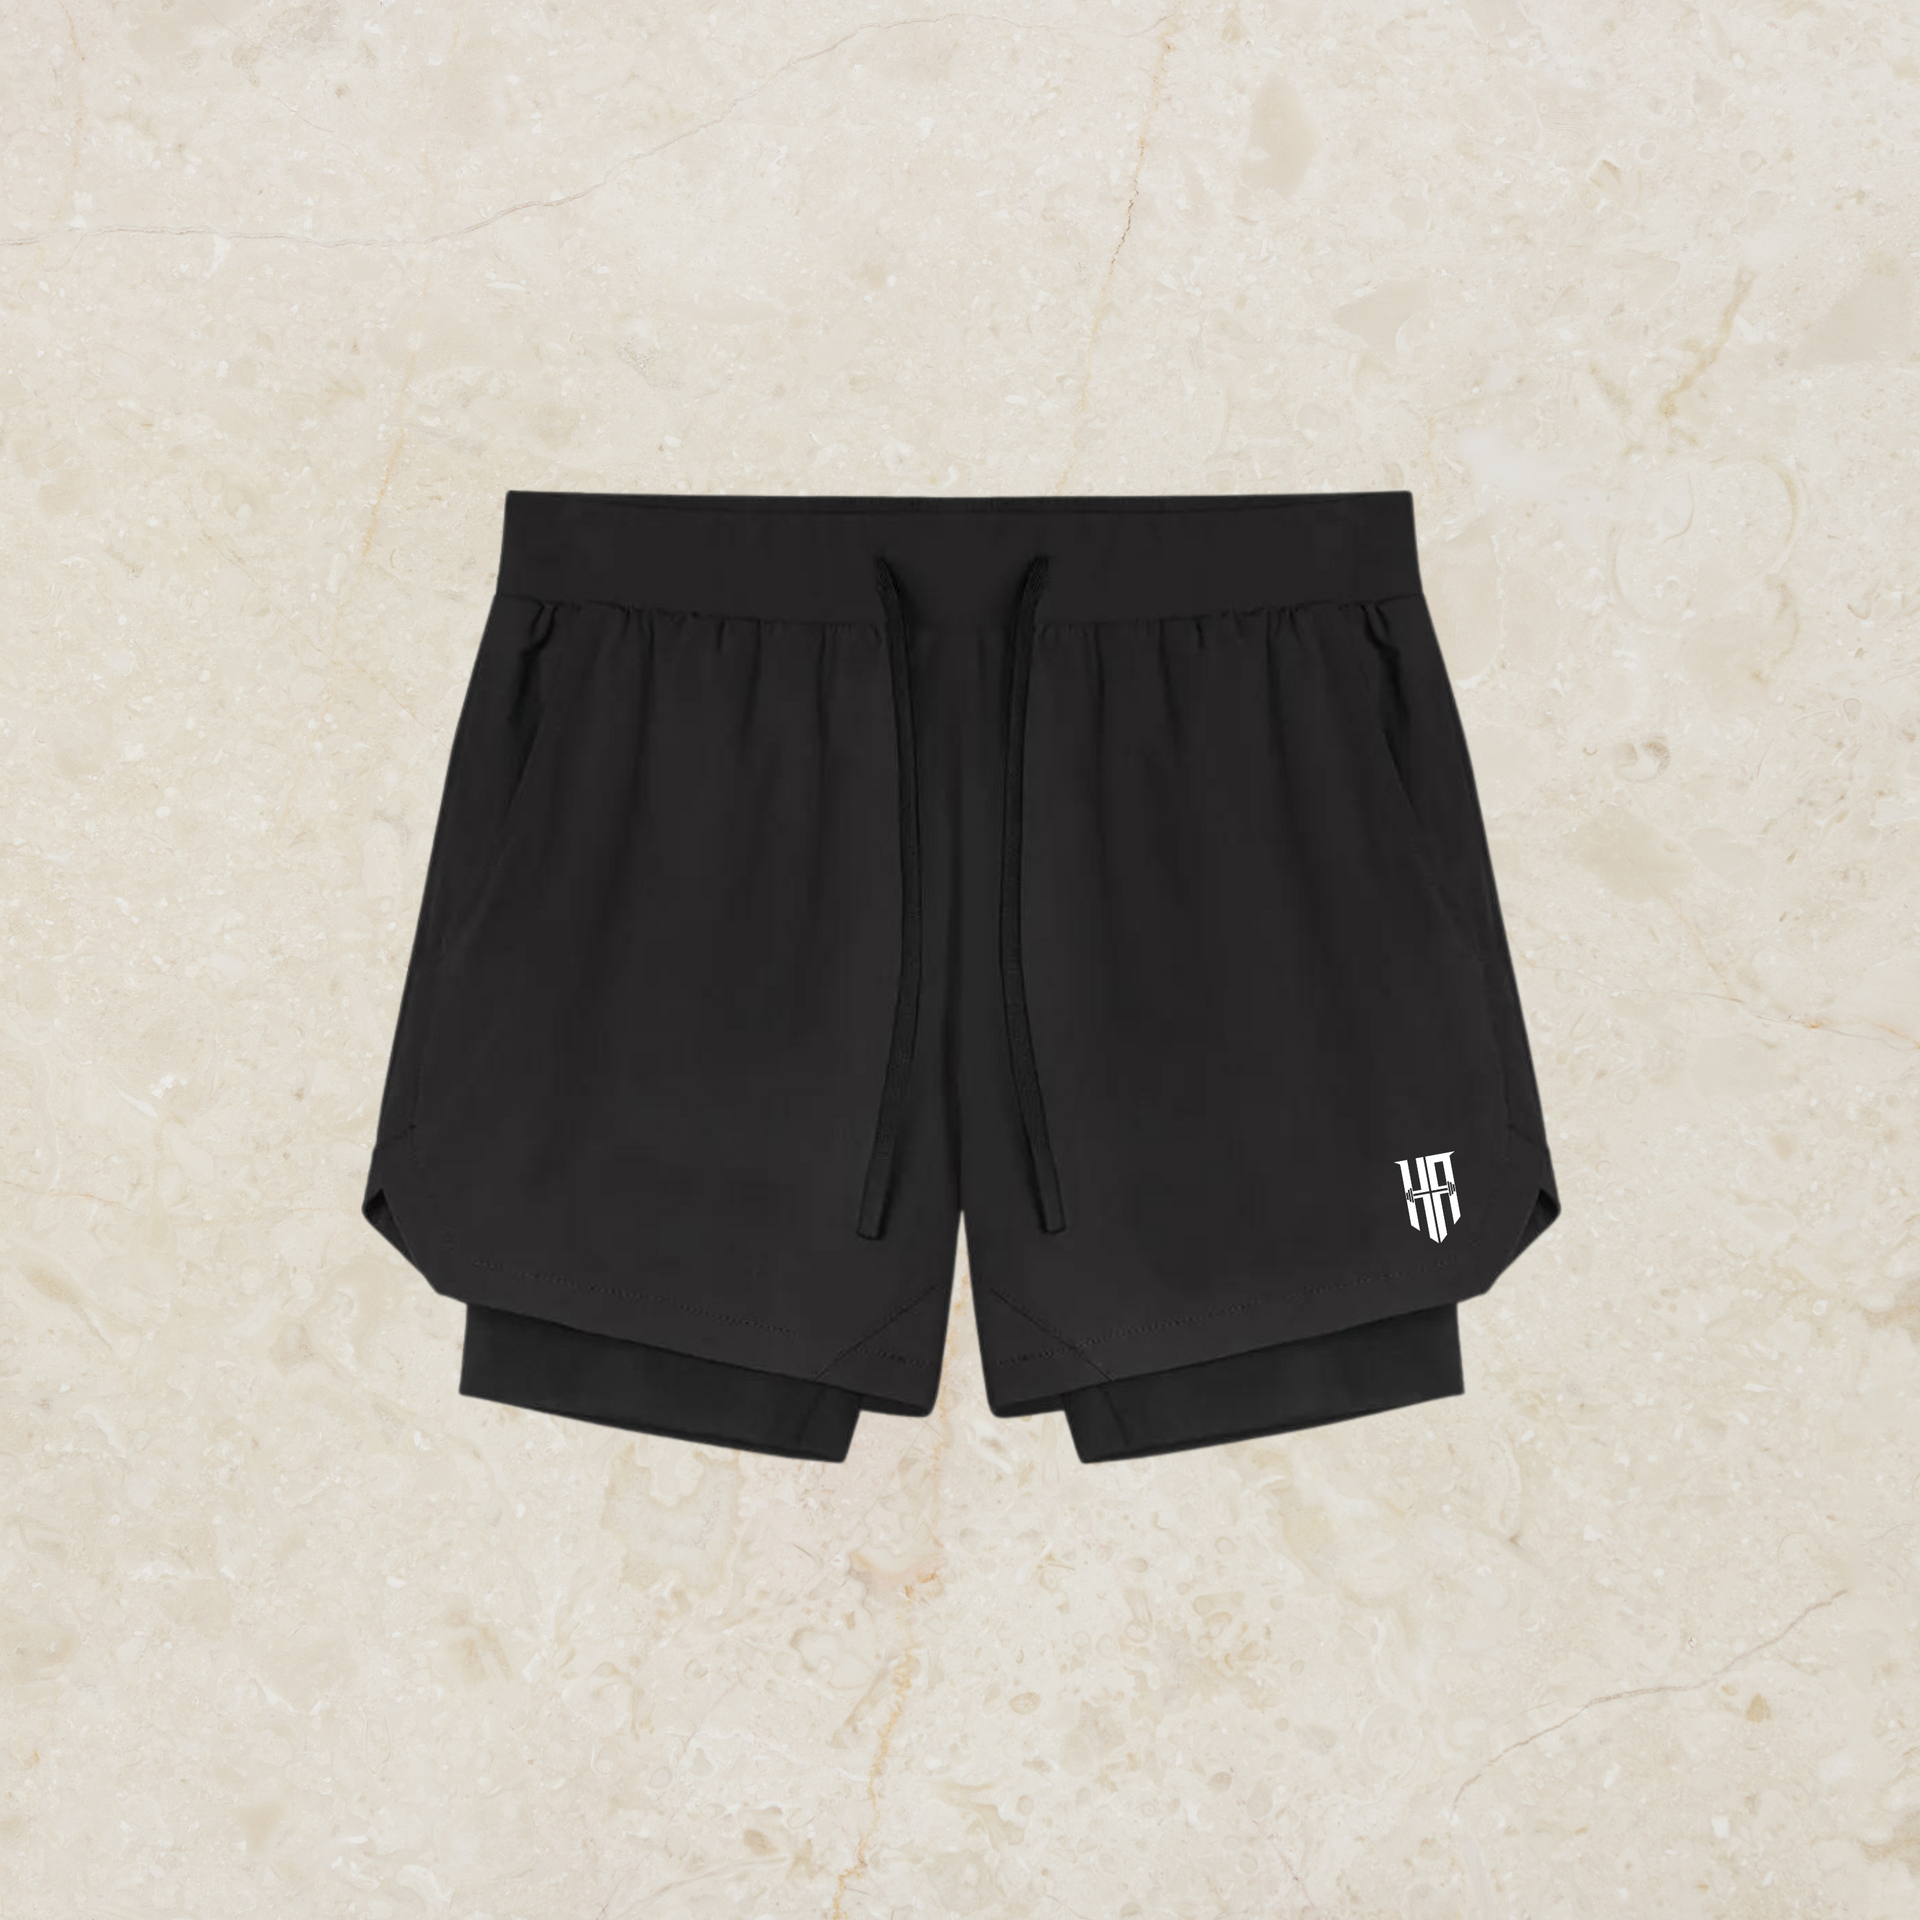 QAQA - A dual Ladies training shorts that comes with inner tights as well!